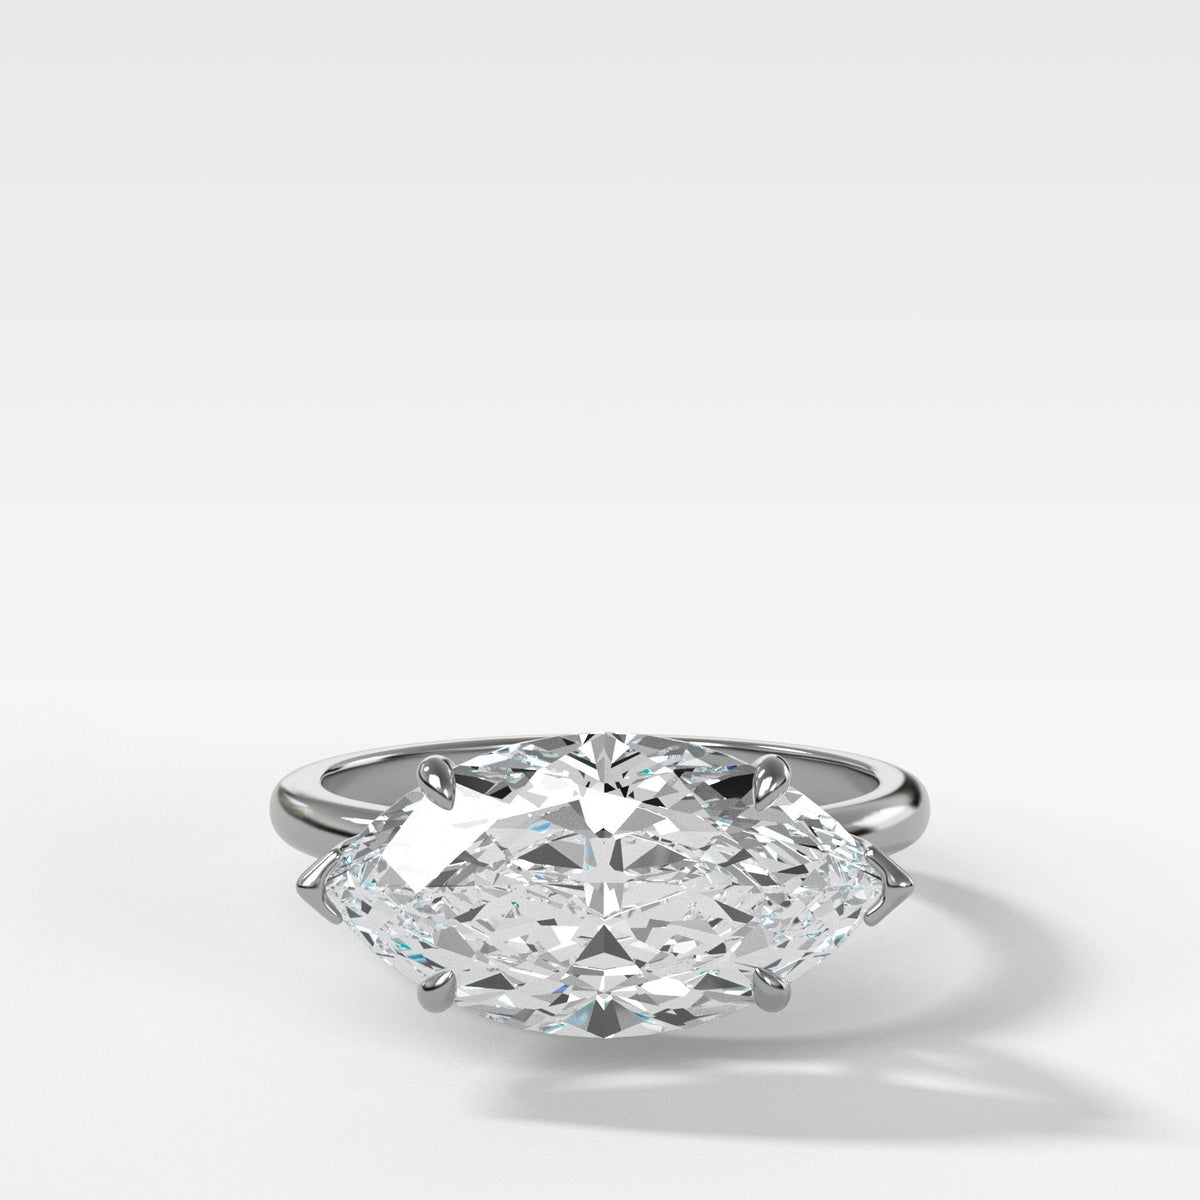 Crescent Solitaire With Marquise Cut by Good Stone in White Gold